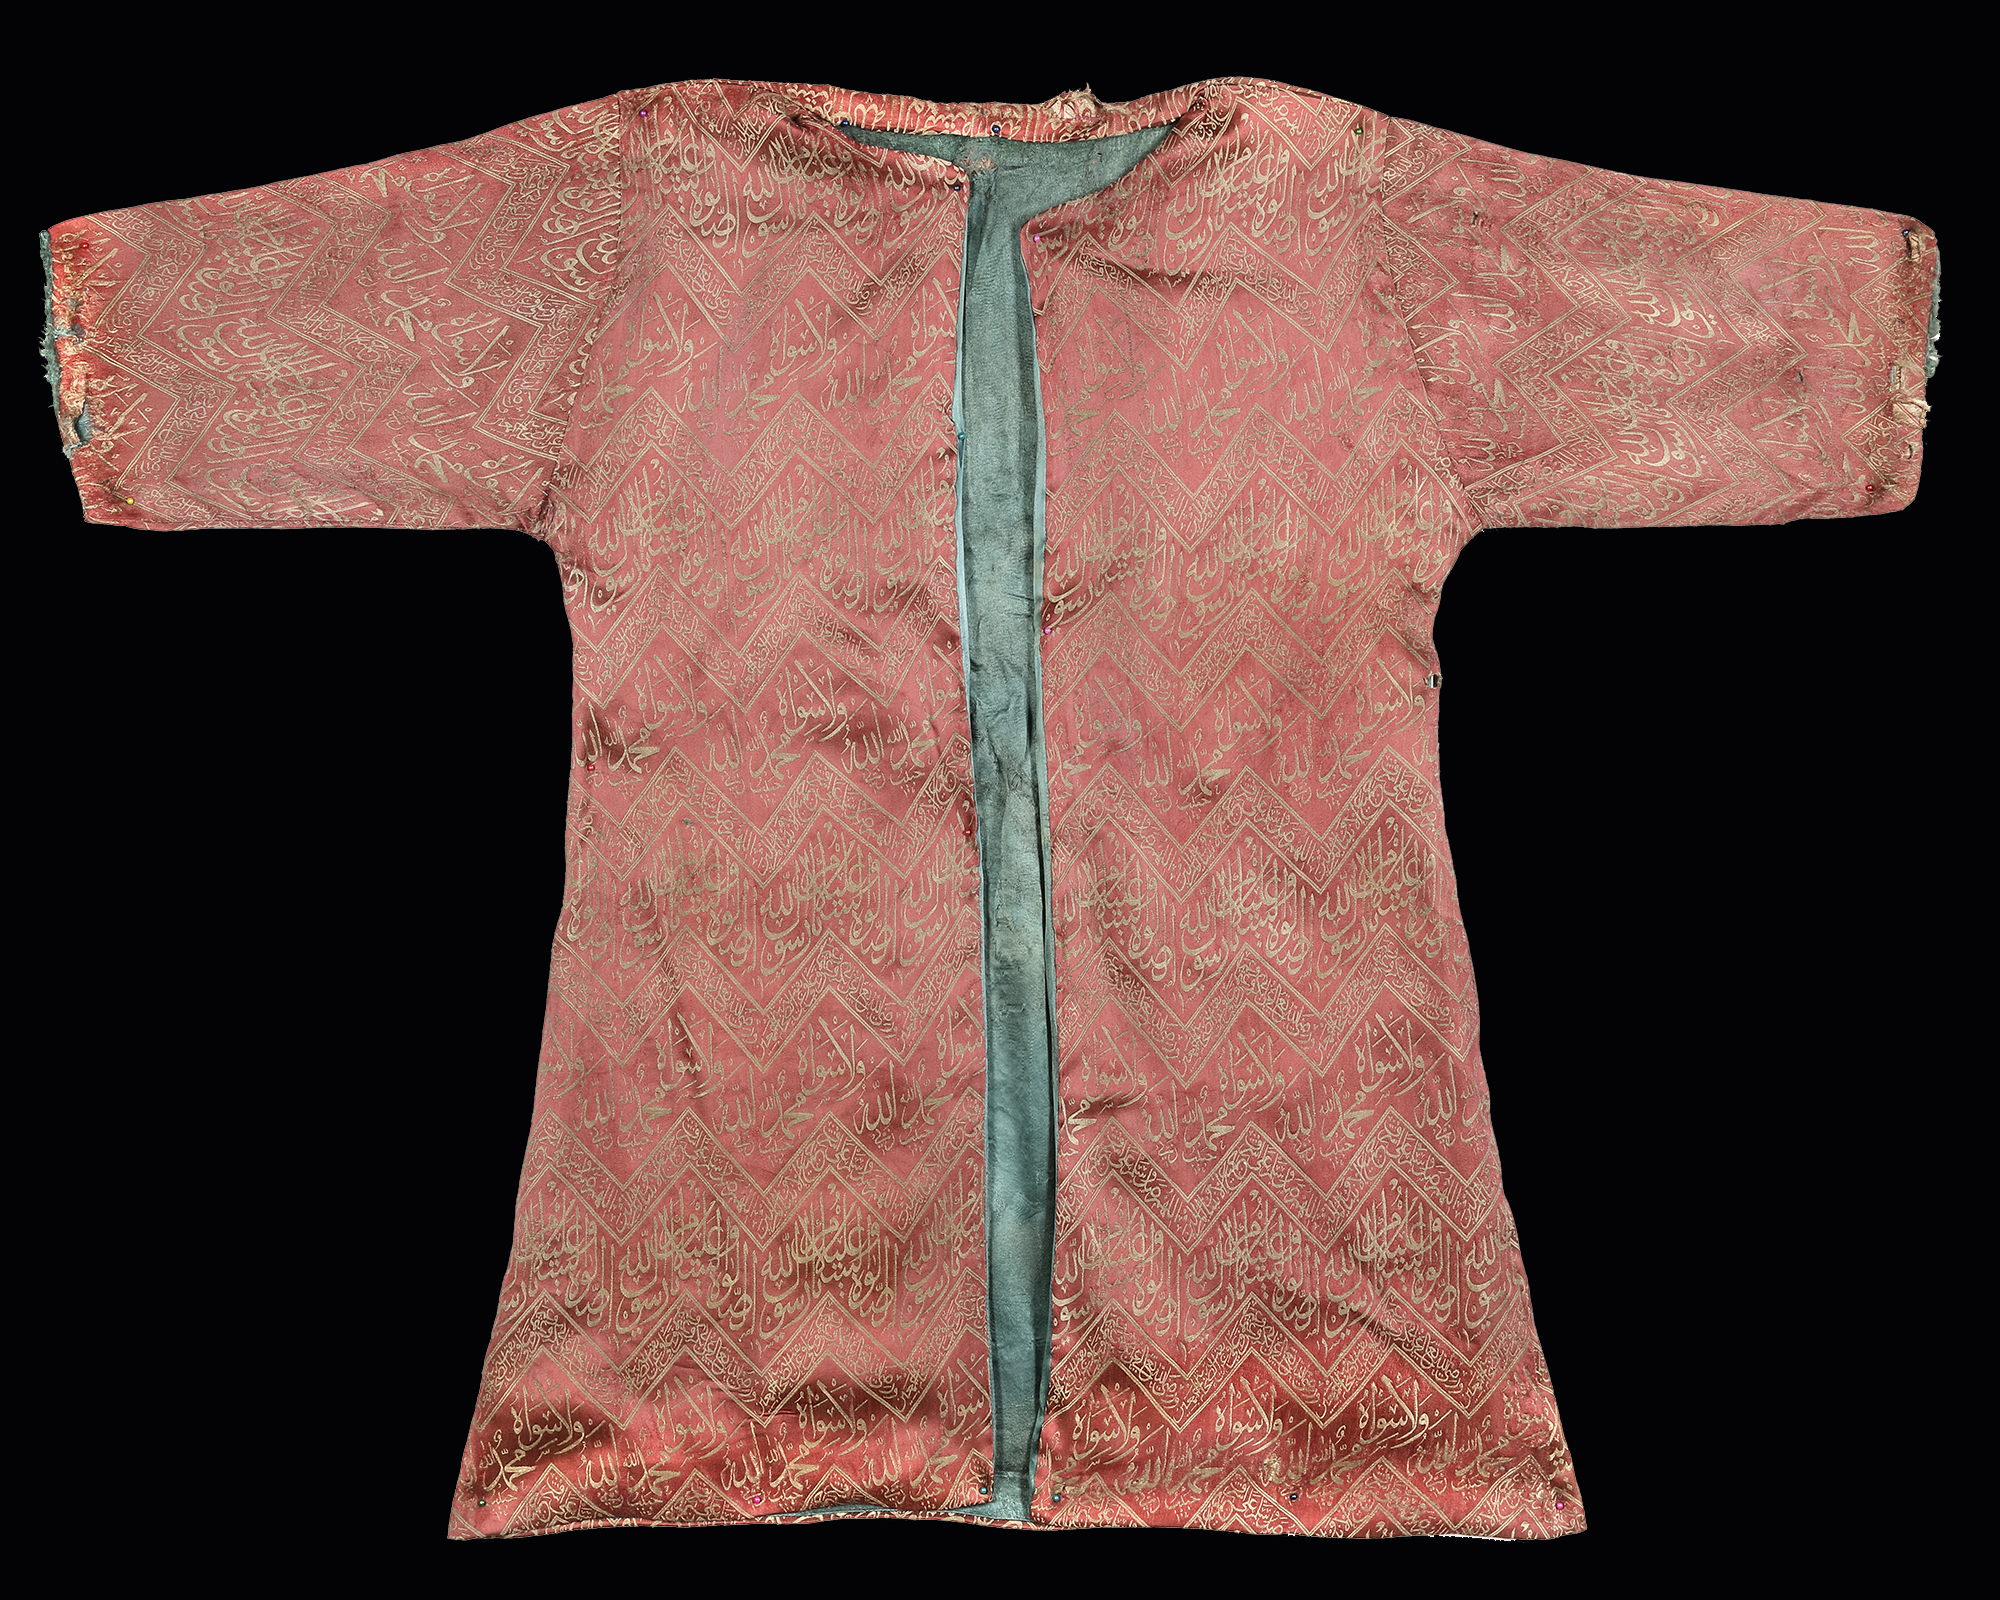 AN OTTOMAN LAMPAS-WEAVE TUNIC MADE FROM A CENOTAPH COVER, TURKEY, LATE 19TH CENTURY - Image 2 of 4